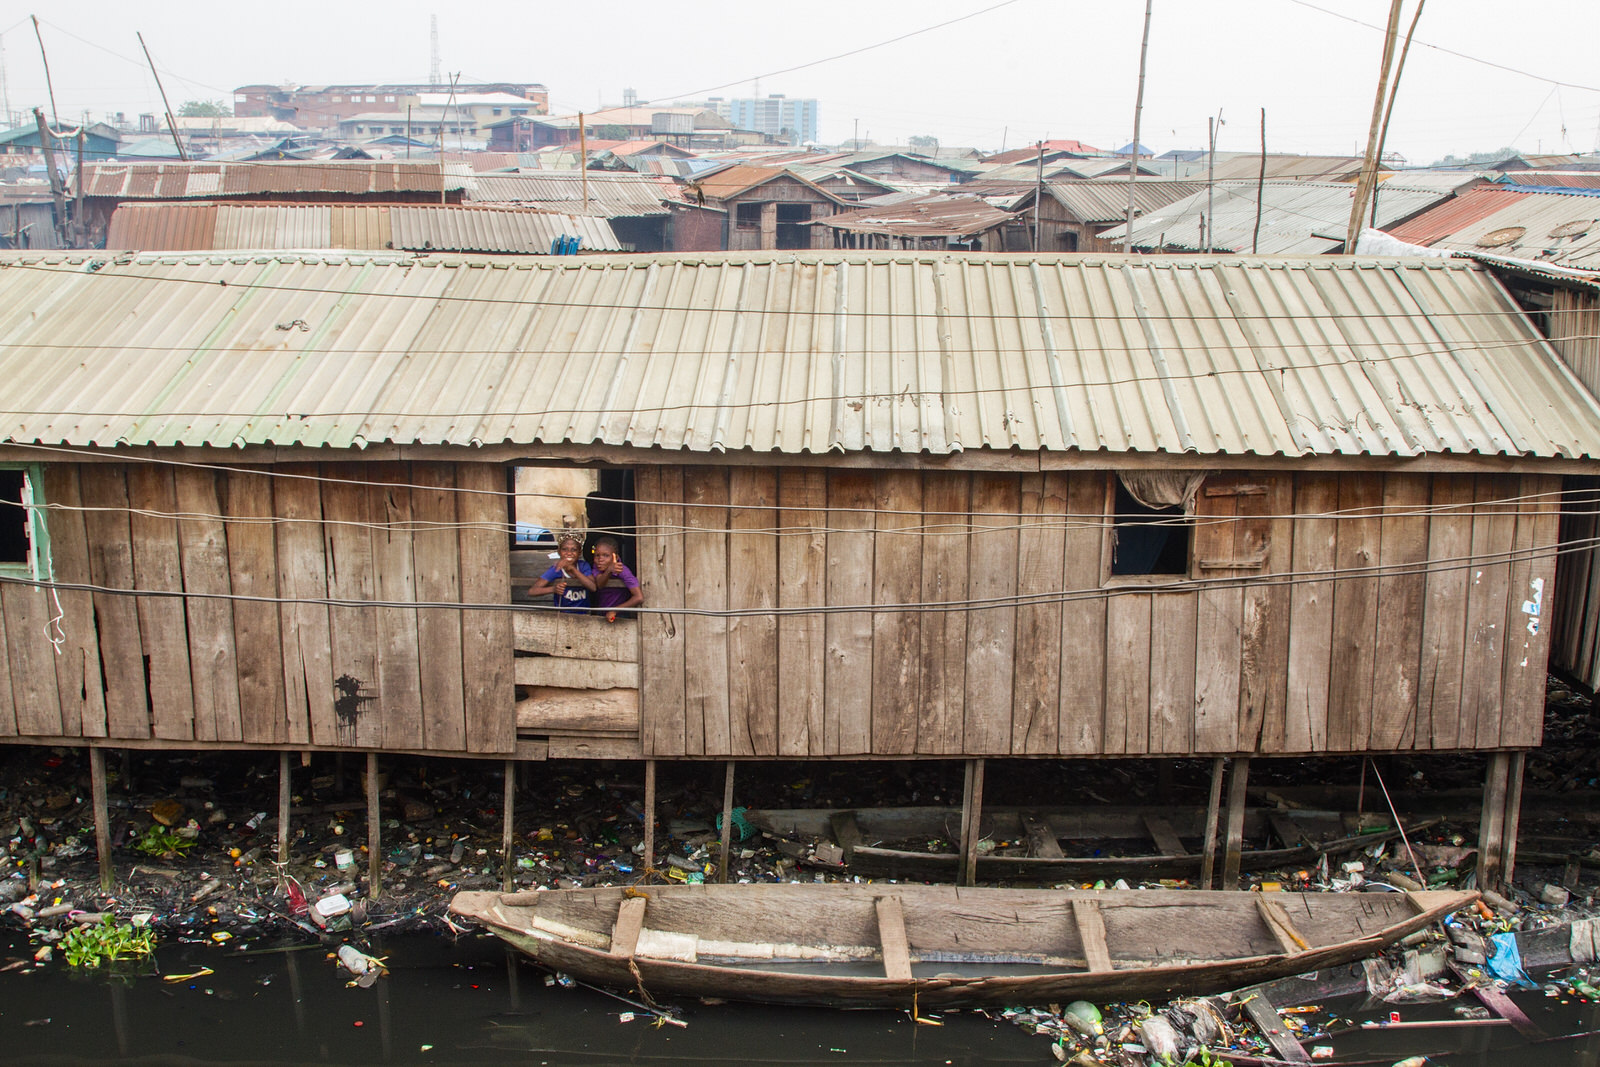  Makoko, was formed as a fishing village in the 19th Century. It is one of many waterfront communities in Lagos that live with a constant threat of eviction due to land-grabbing by the Lagos government. 